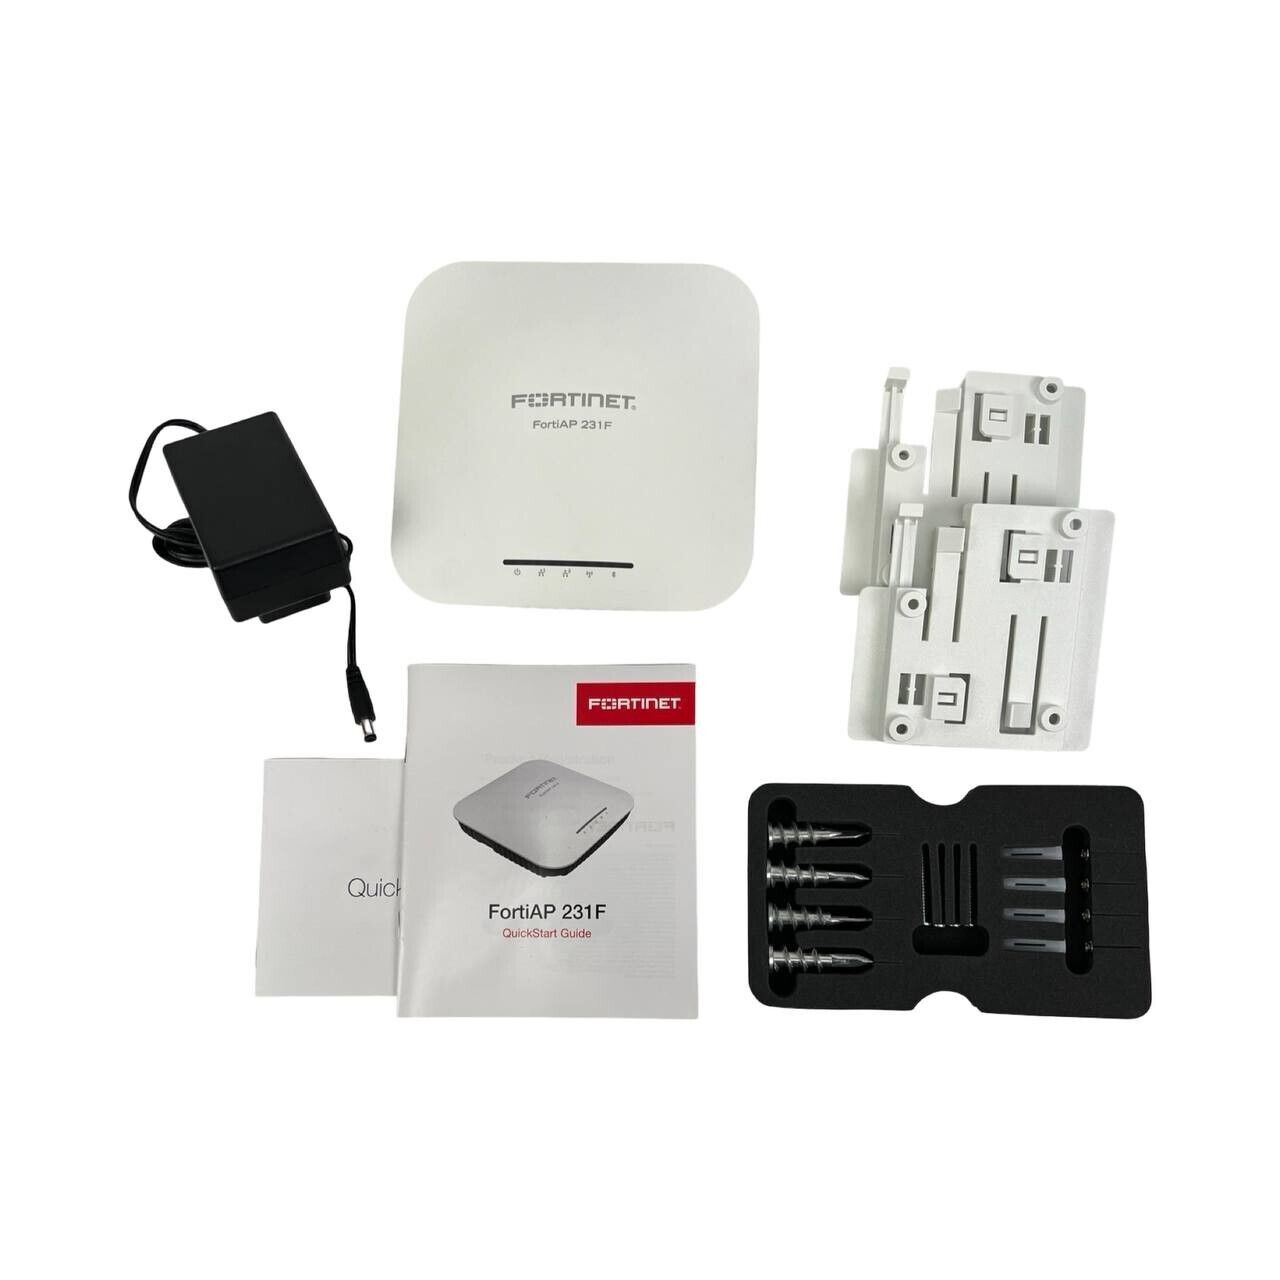 Fortinet FortiAP 231F Indoor Wireless Dual Band Access Point FAP-231F NEW